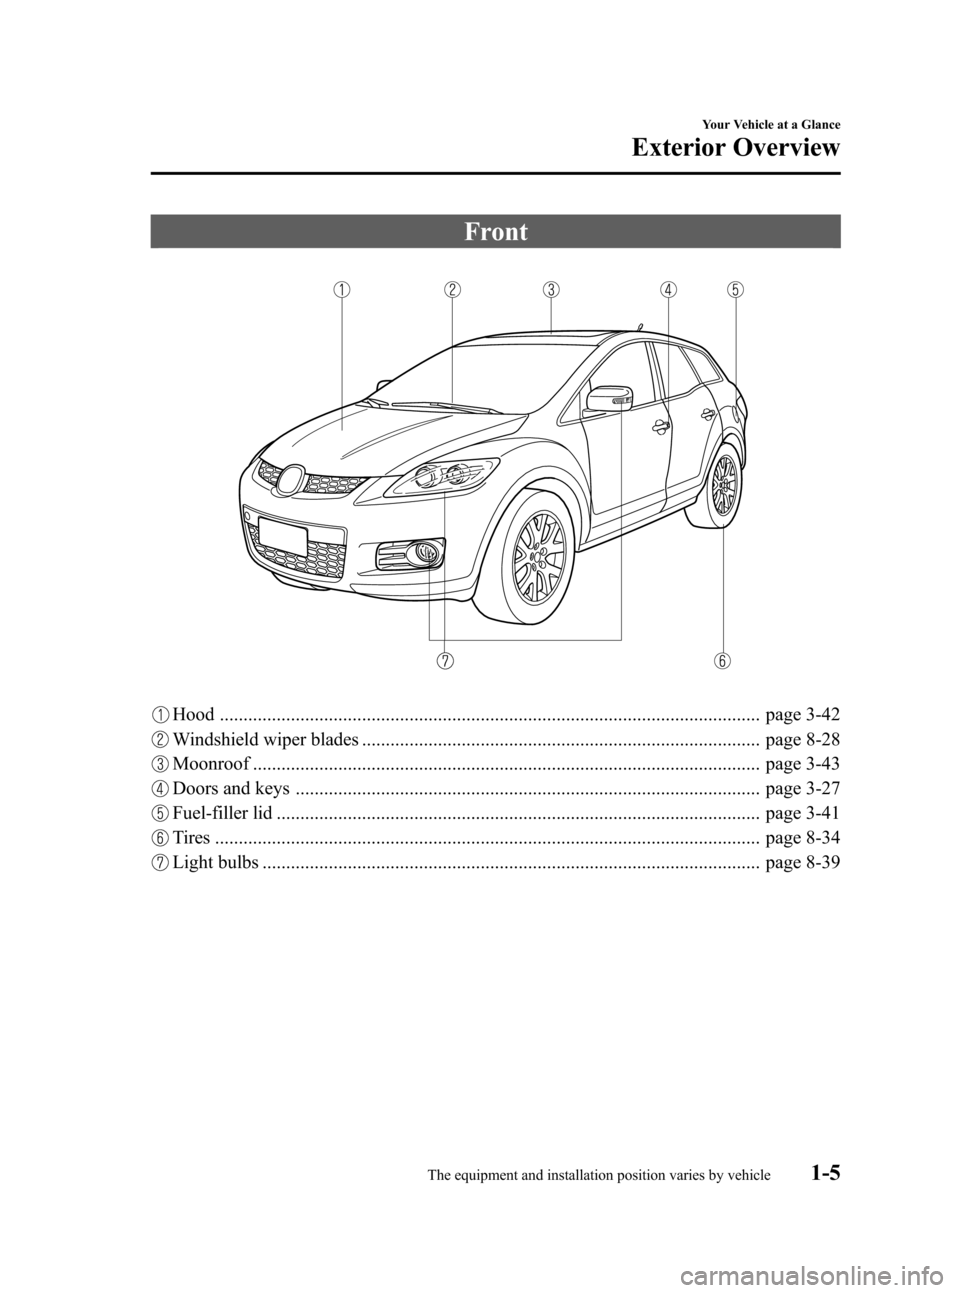 MAZDA MODEL CX-7 2009   (in English) User Guide Black plate (11,1)
Front
Hood .................................................................................................................. page 3-42
Windshield wiper blades .....................